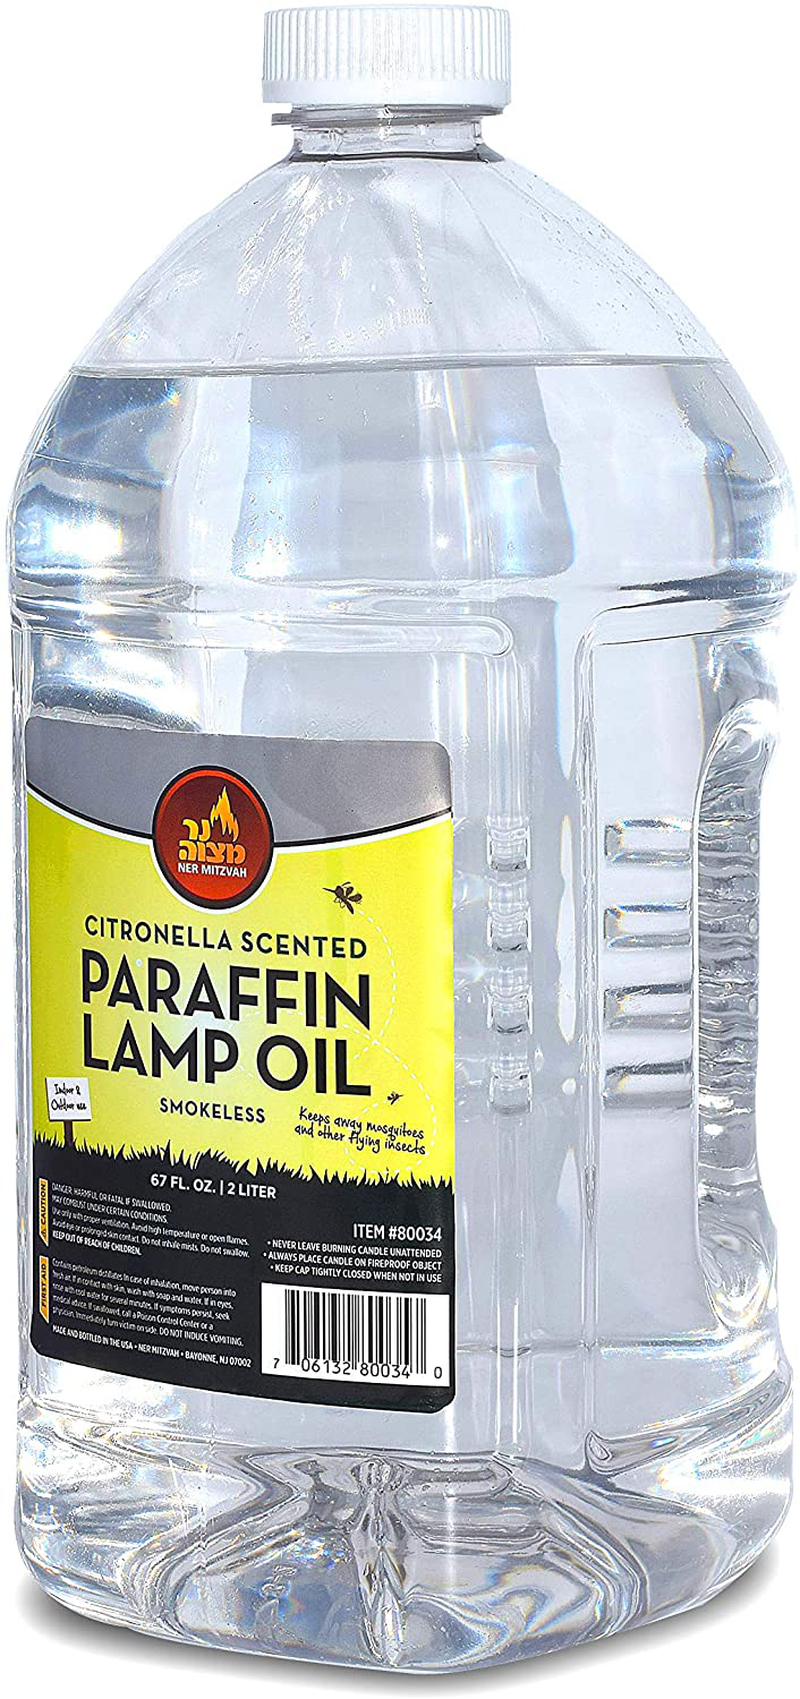 Citronella Scented Lamp Oil, 2 Liter - Smokeless and Odorless Insect and Mosquito Repellent Paraffin Lamp Oil for Indoor and Outdoor Lanterns, Torches, Oil Candle - by Ner Mitzvah